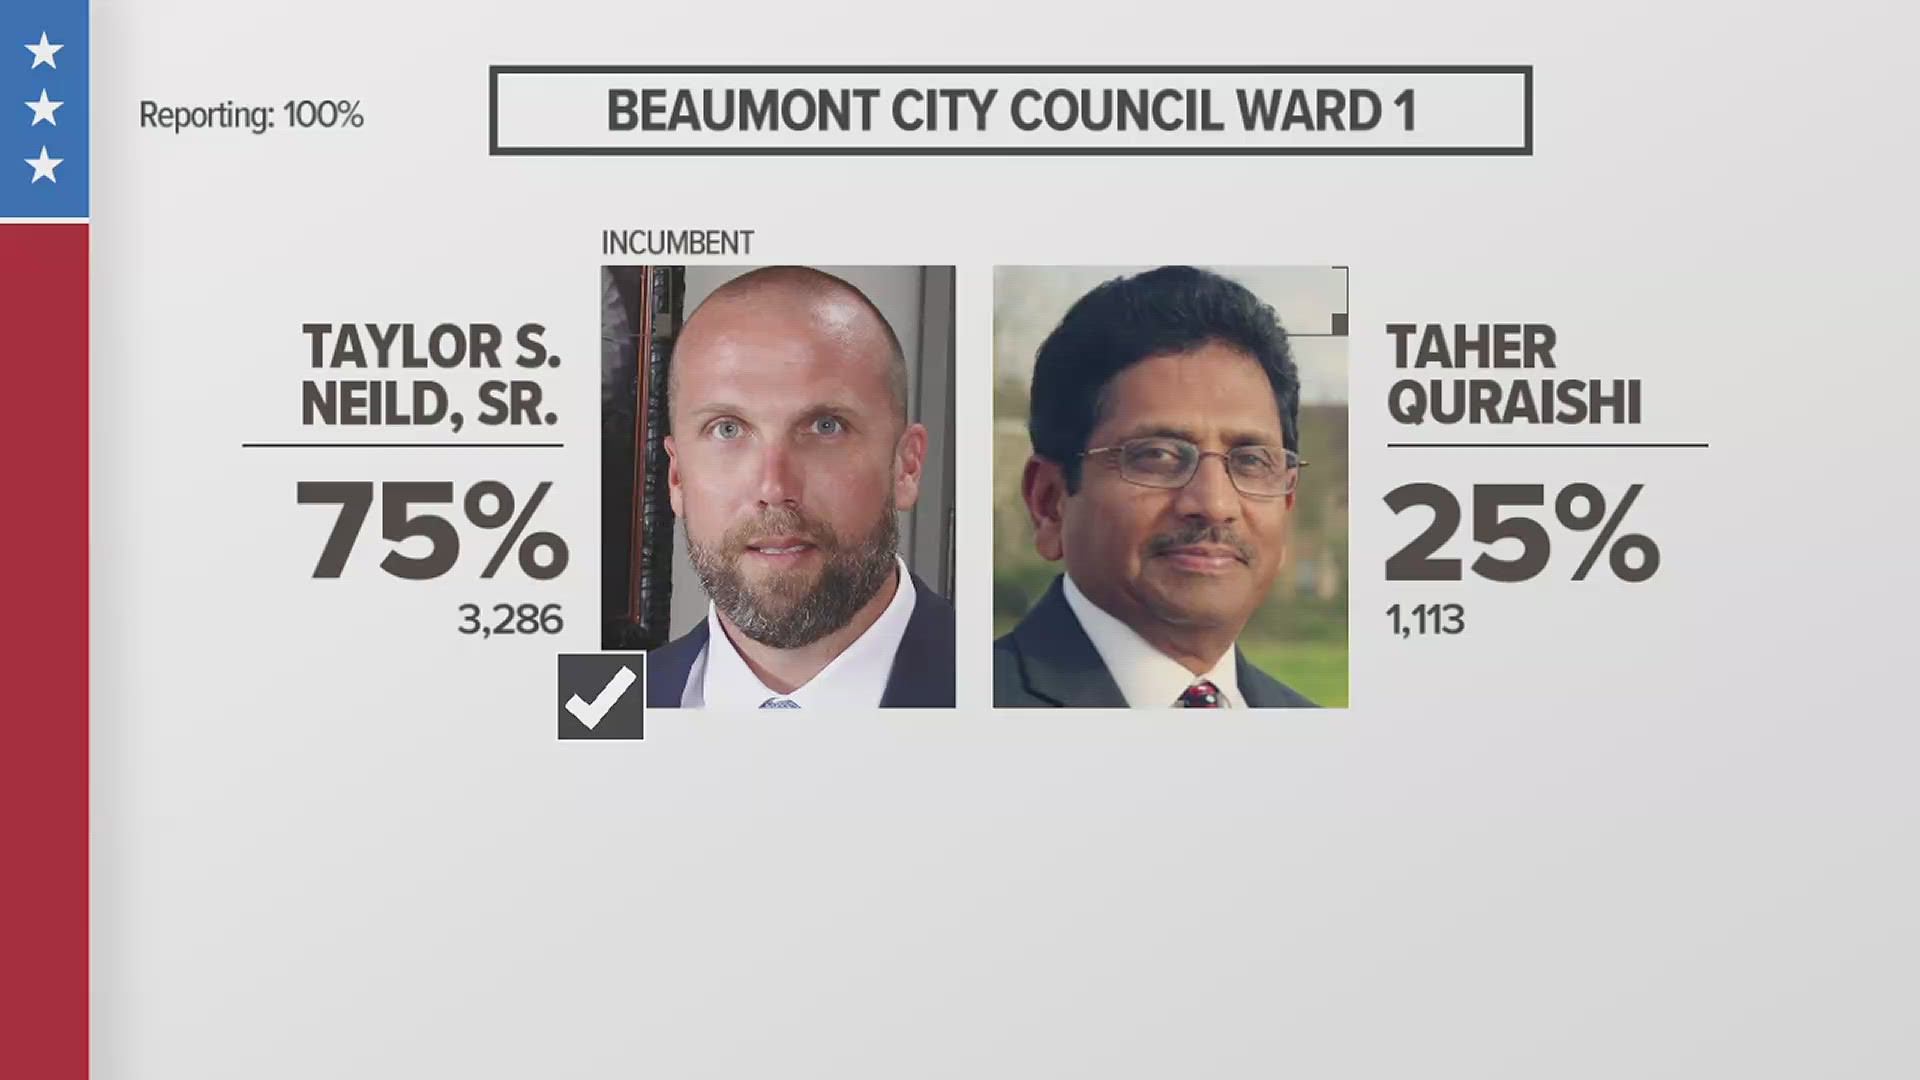 Taylor S. Neild, Sr. has won the race for Beaumont City Council's Ward One seat.